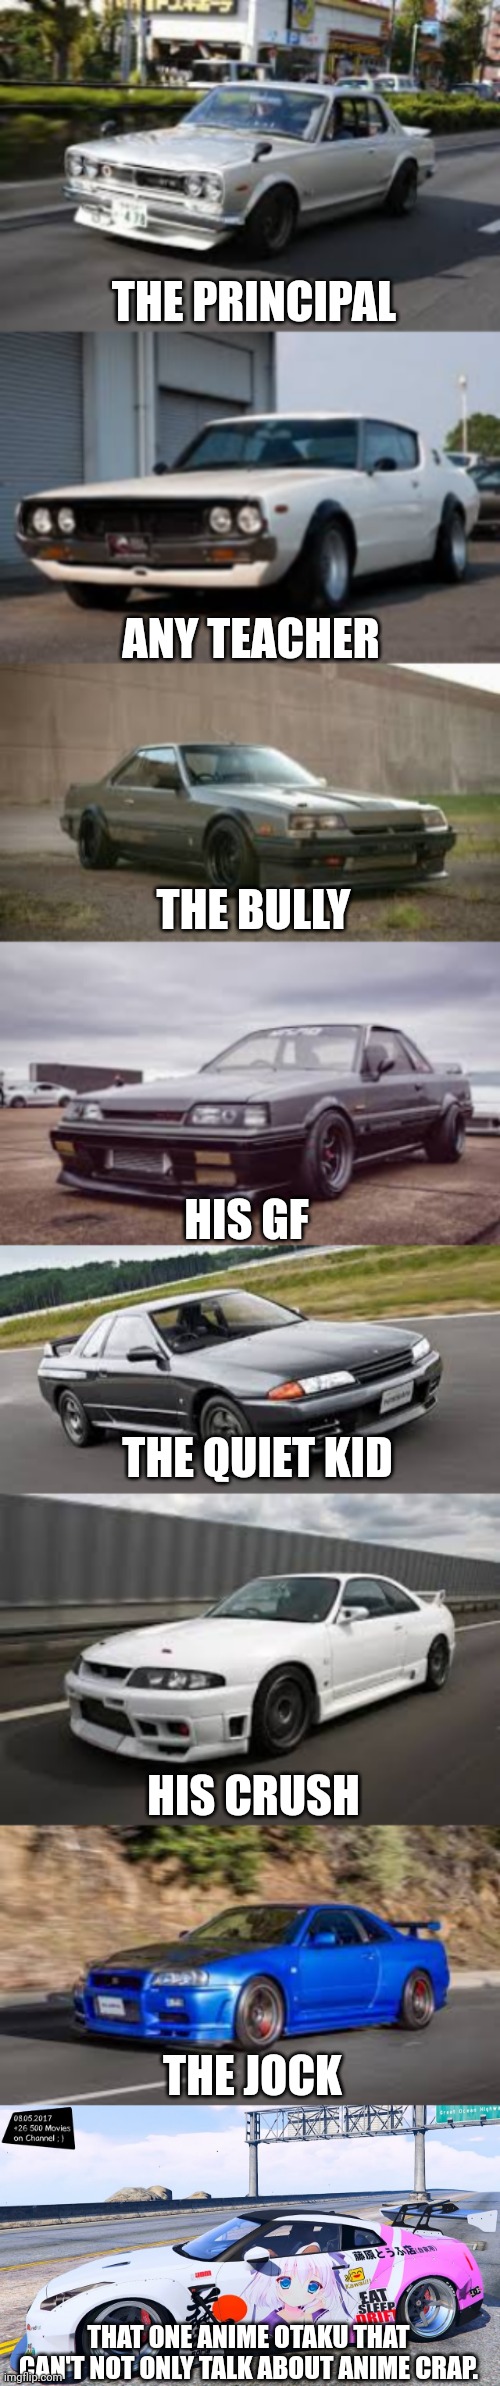 Relatable? |  THE PRINCIPAL; ANY TEACHER; THE BULLY; HIS GF; THE QUIET KID; HIS CRUSH; THE JOCK; THAT ONE ANIME OTAKU THAT CAN'T NOT ONLY TALK ABOUT ANIME CRAP. | image tagged in cars,skyline,nissan,gt-r,school,funny | made w/ Imgflip meme maker